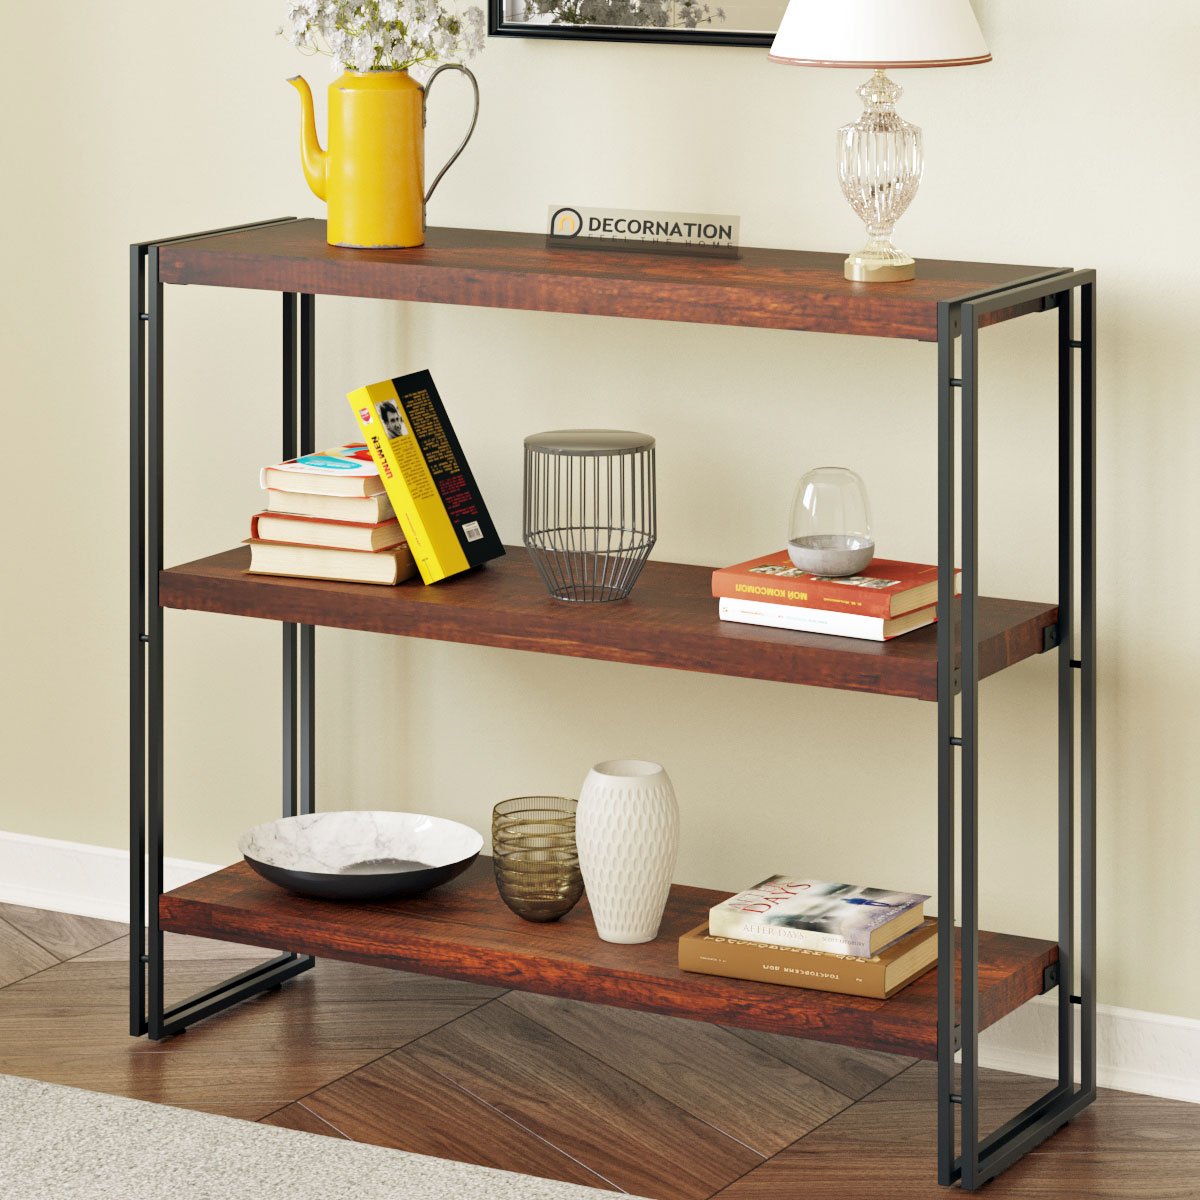 Indsutrial Rustic Book Shelf with Iron Legs – Natural Wood Finish